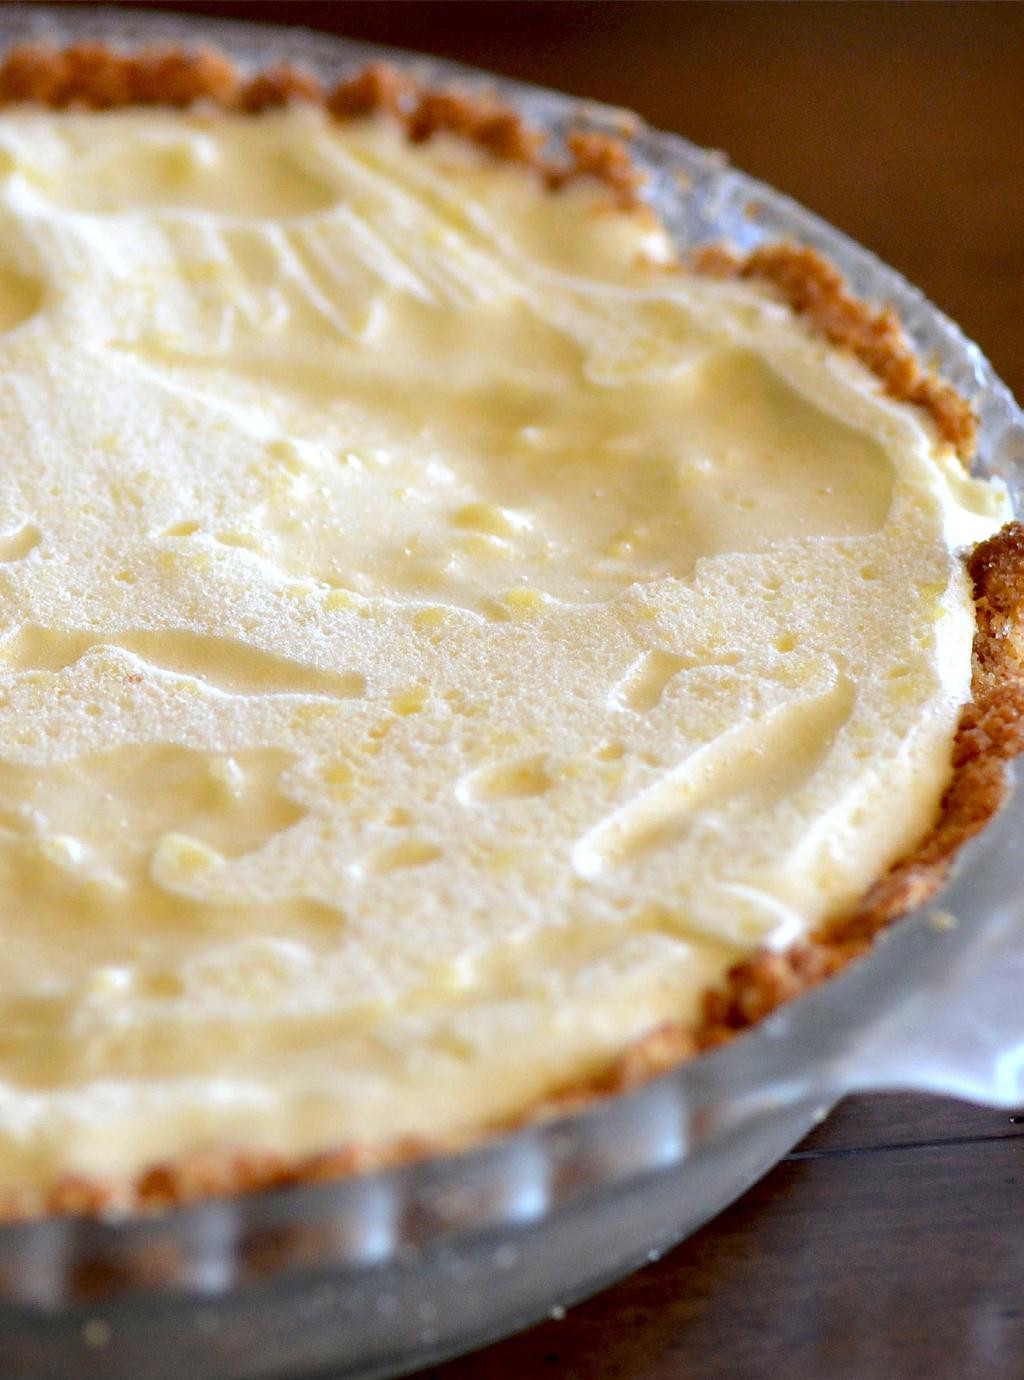 EASY LEMON PIE 15 ULTRA-FAST DESSERT RECIPES Active time: 20 minutes Cook time: 30 minutes Yield: 6